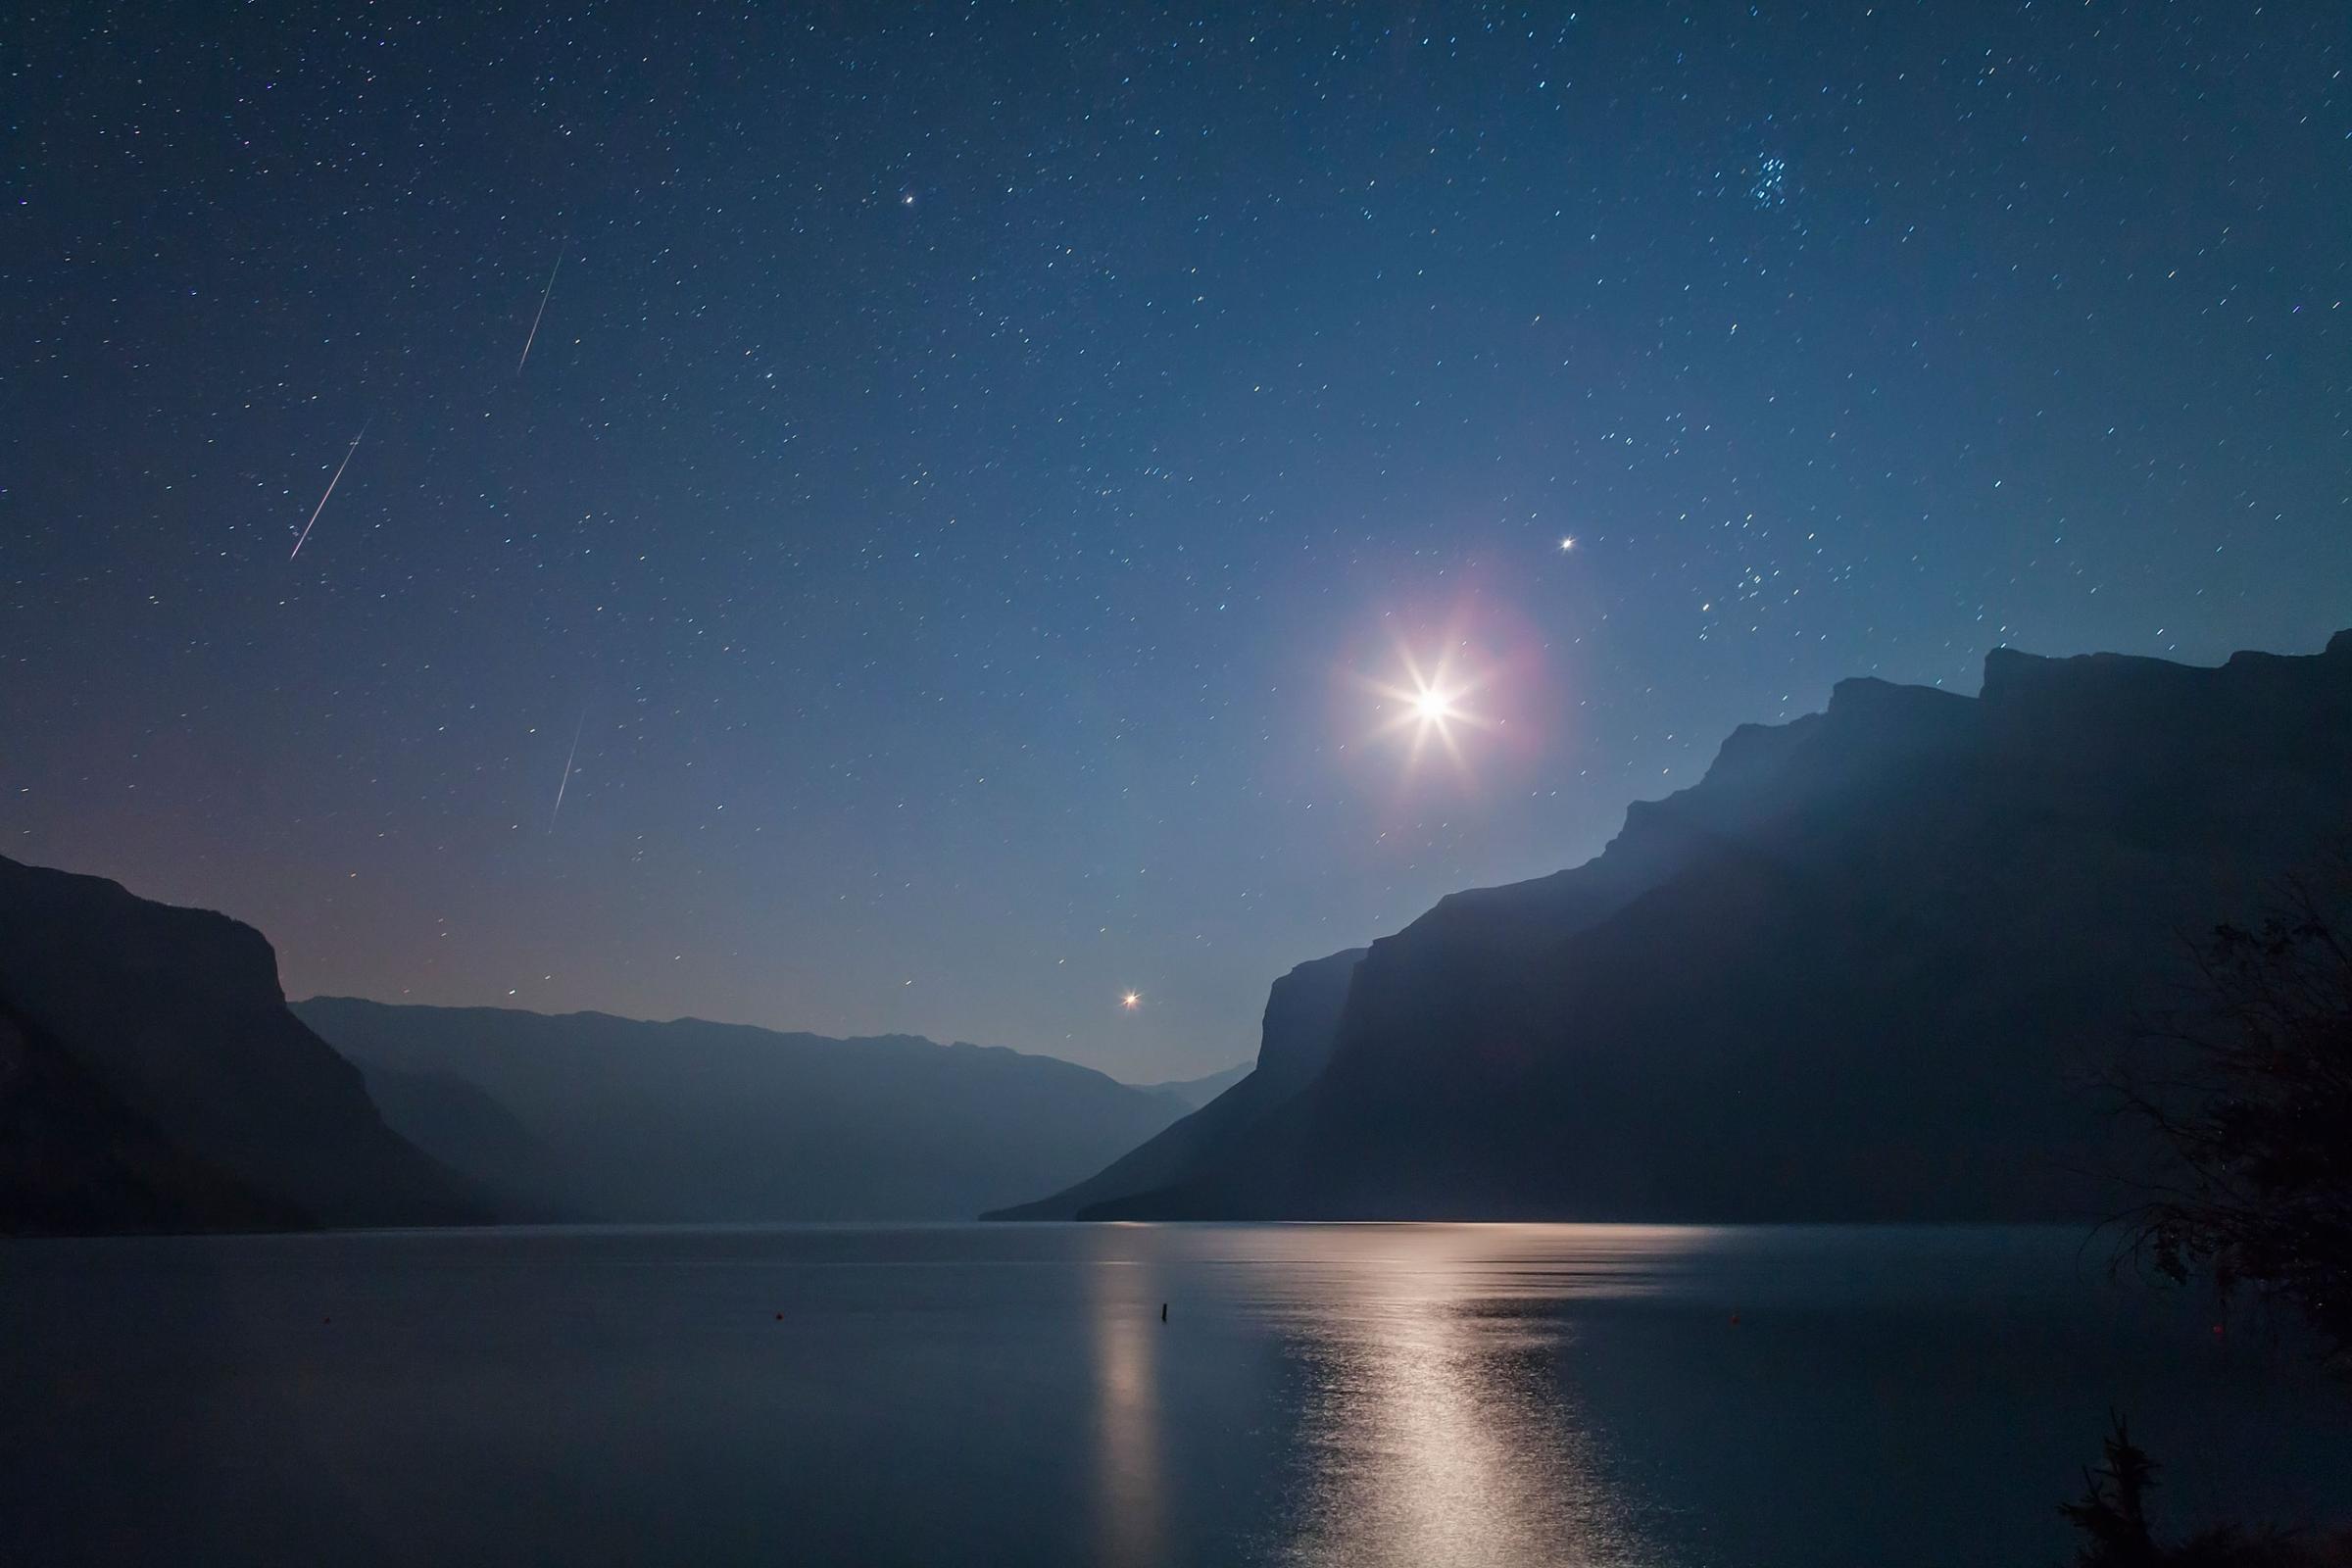 Three Perseid meteors appear in the predawn sky over Lake Minnewanka in Banff National Park, Alberta, Canada on Aug. 12, 2012.